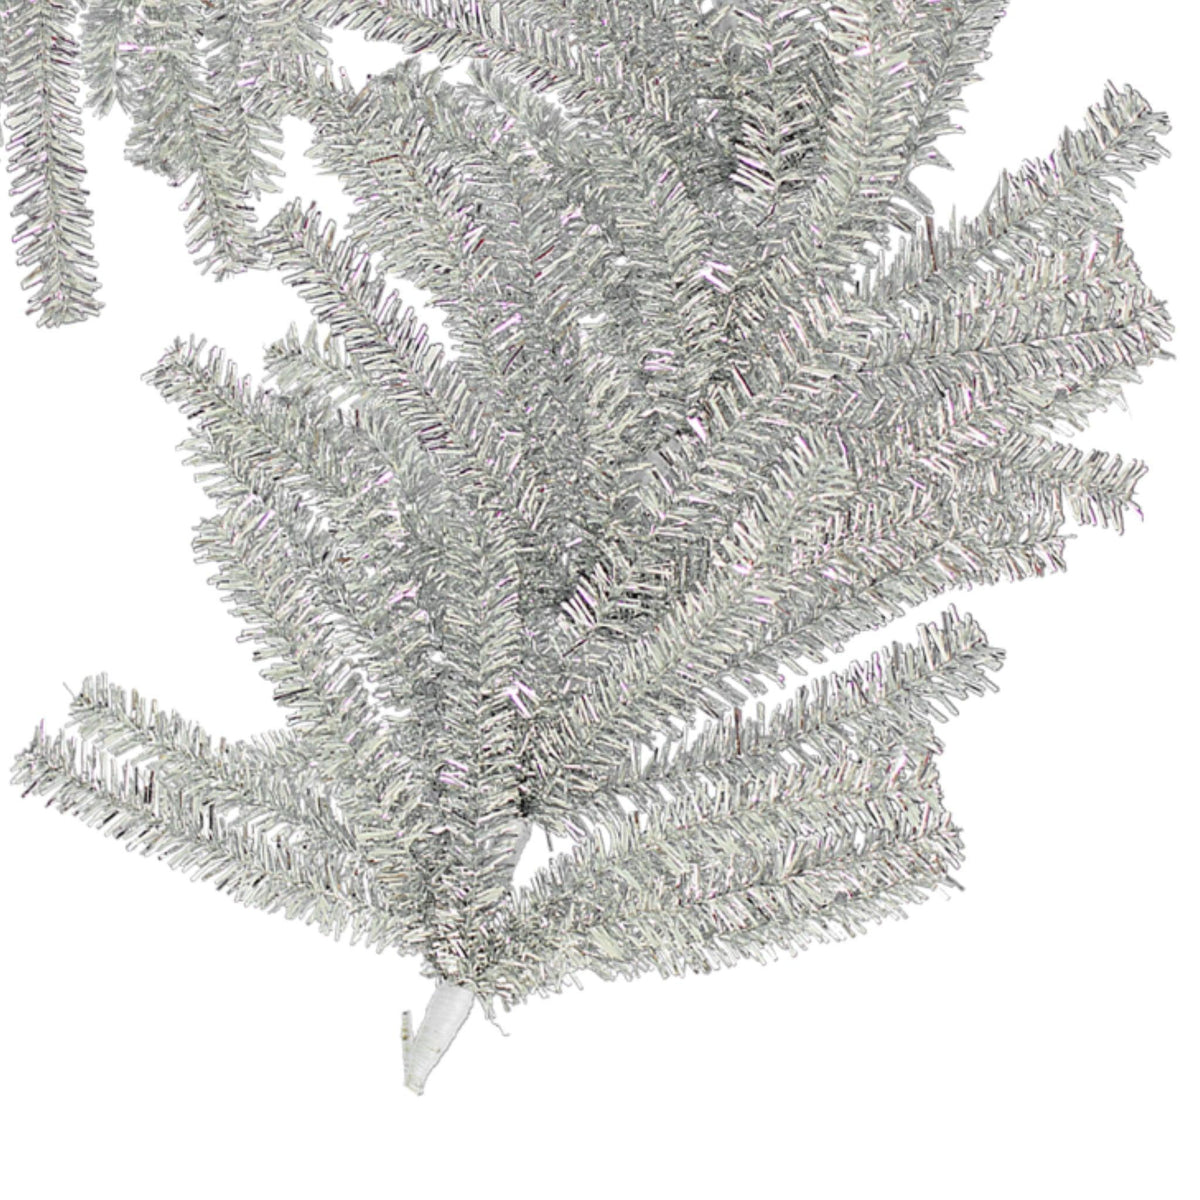 Shop for Lee Display's brand new 6FT Silver 1in Tinsel Brush Garlands on sale at leedisplay.com.  End section